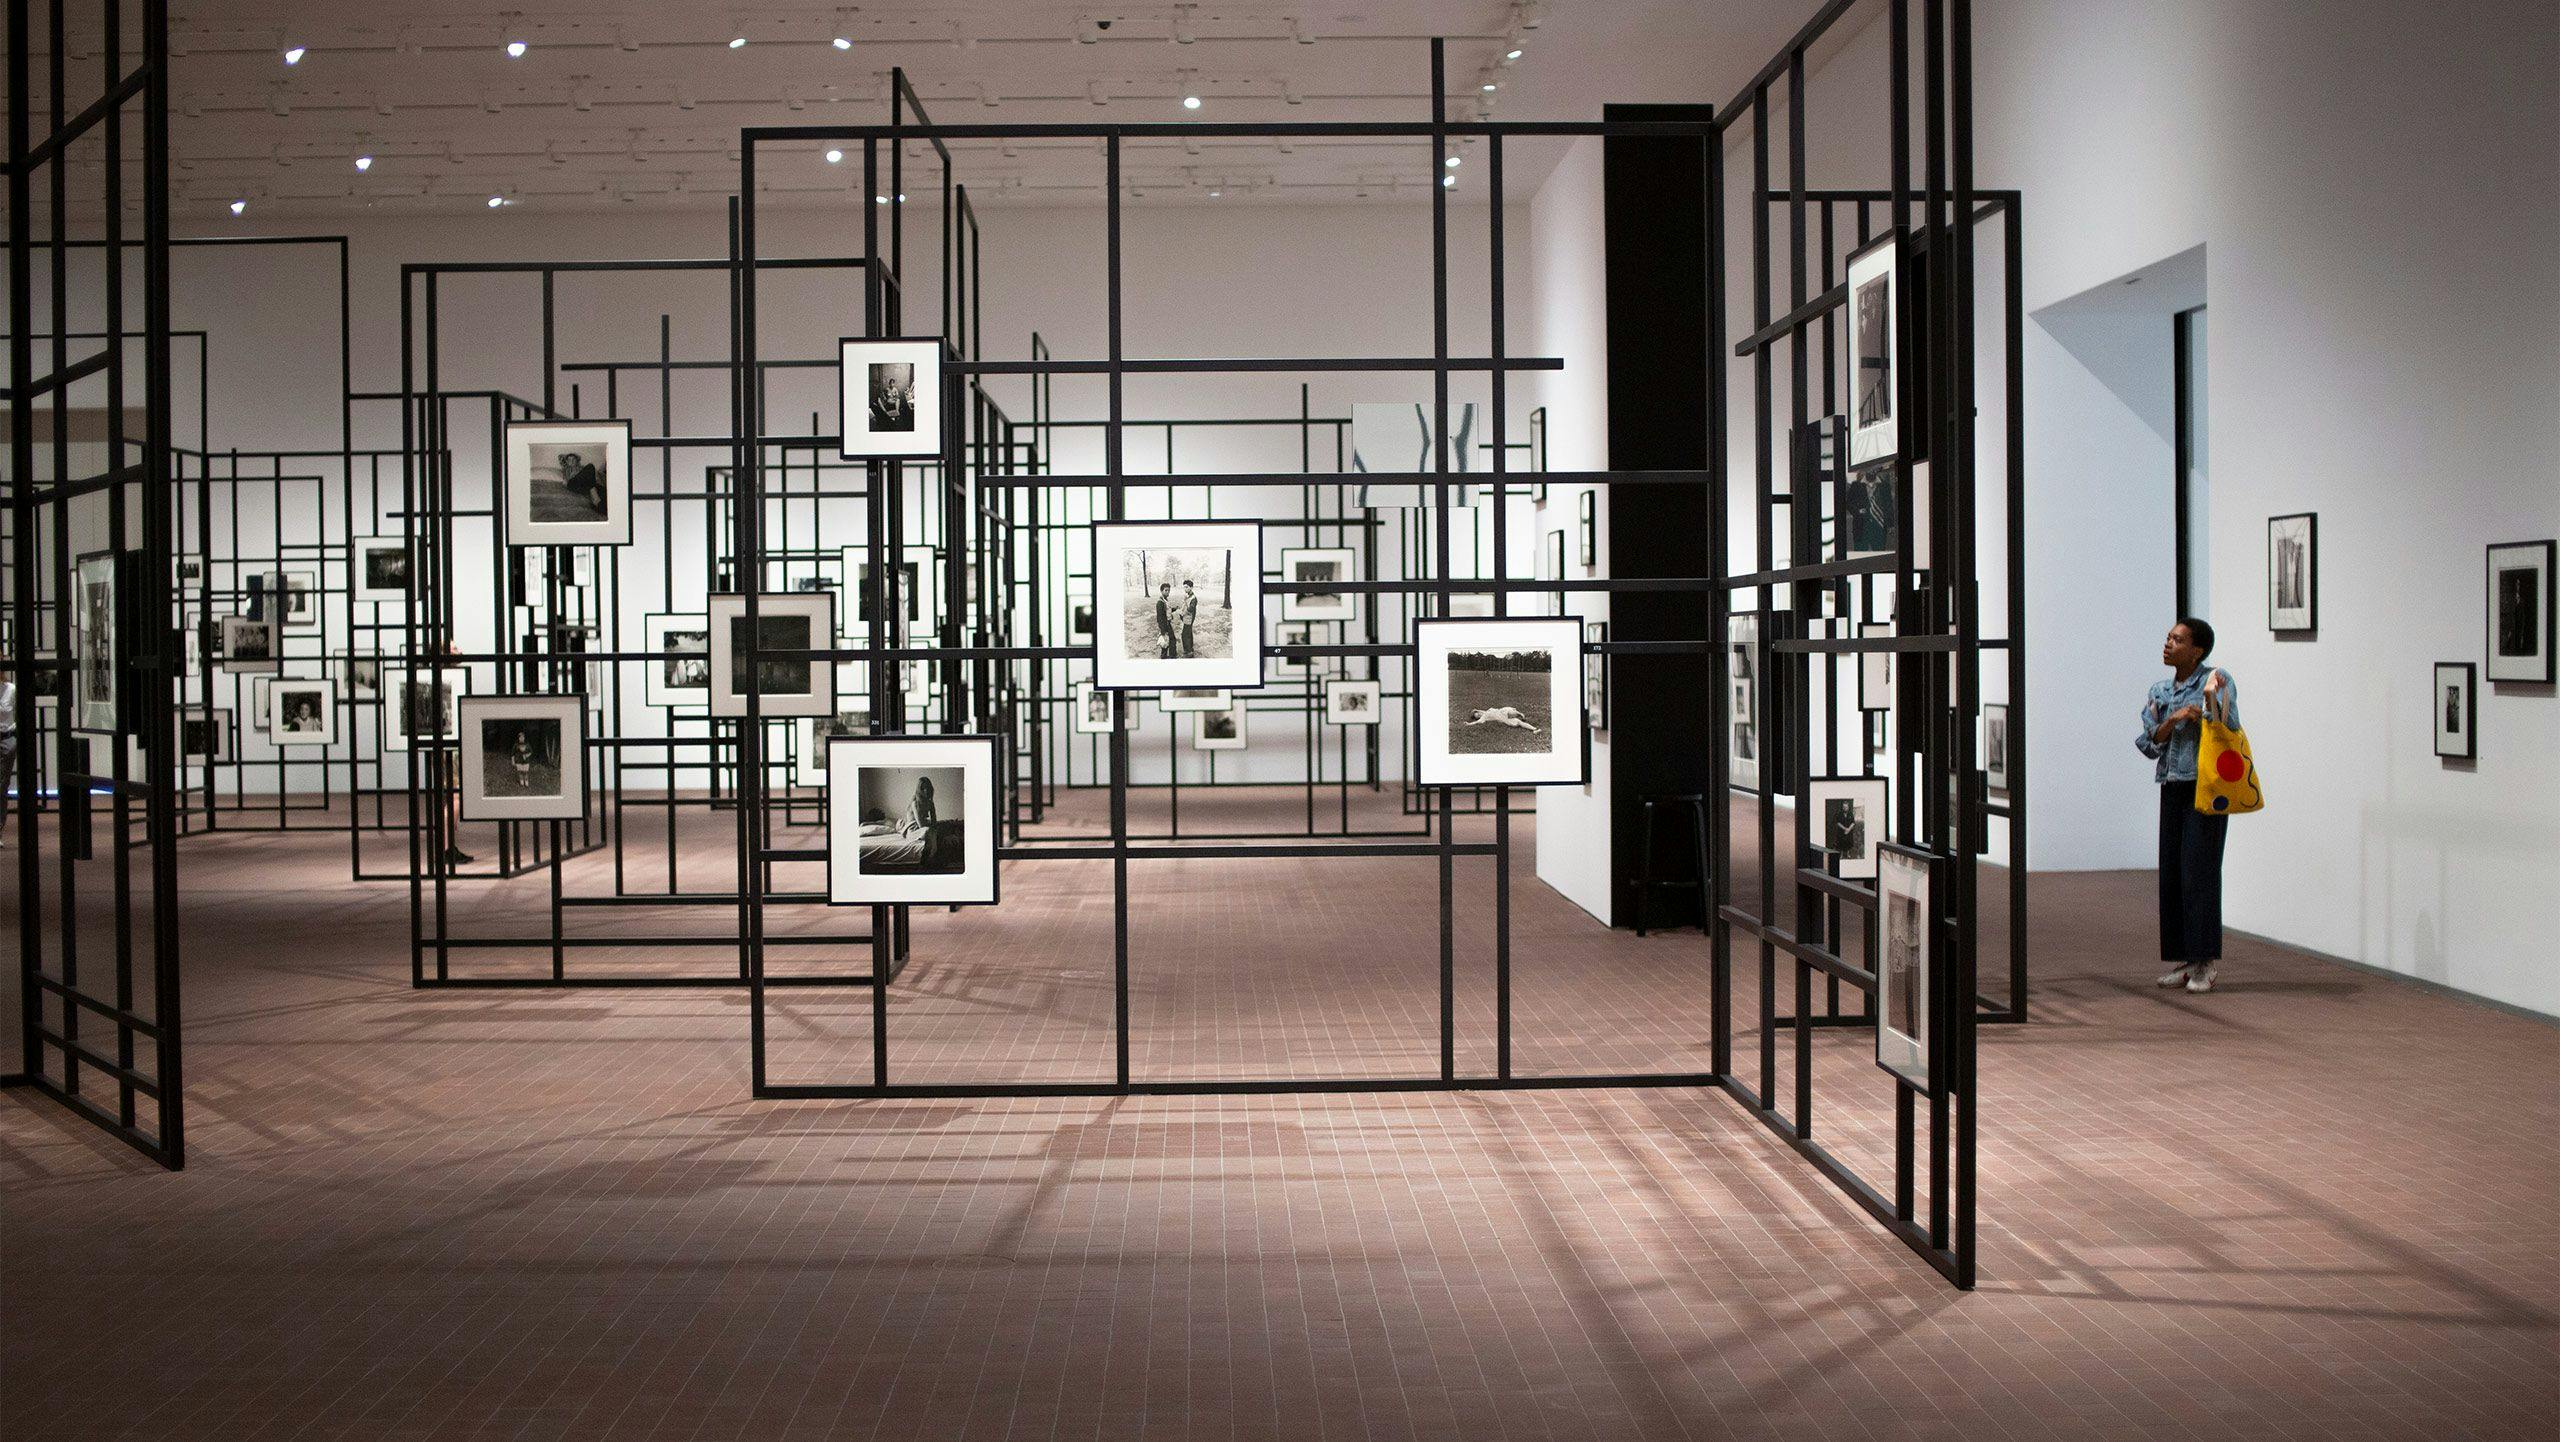 Installation view of an exhibition titled Diane Arbus: Constellation, at LUMA Arles, France.